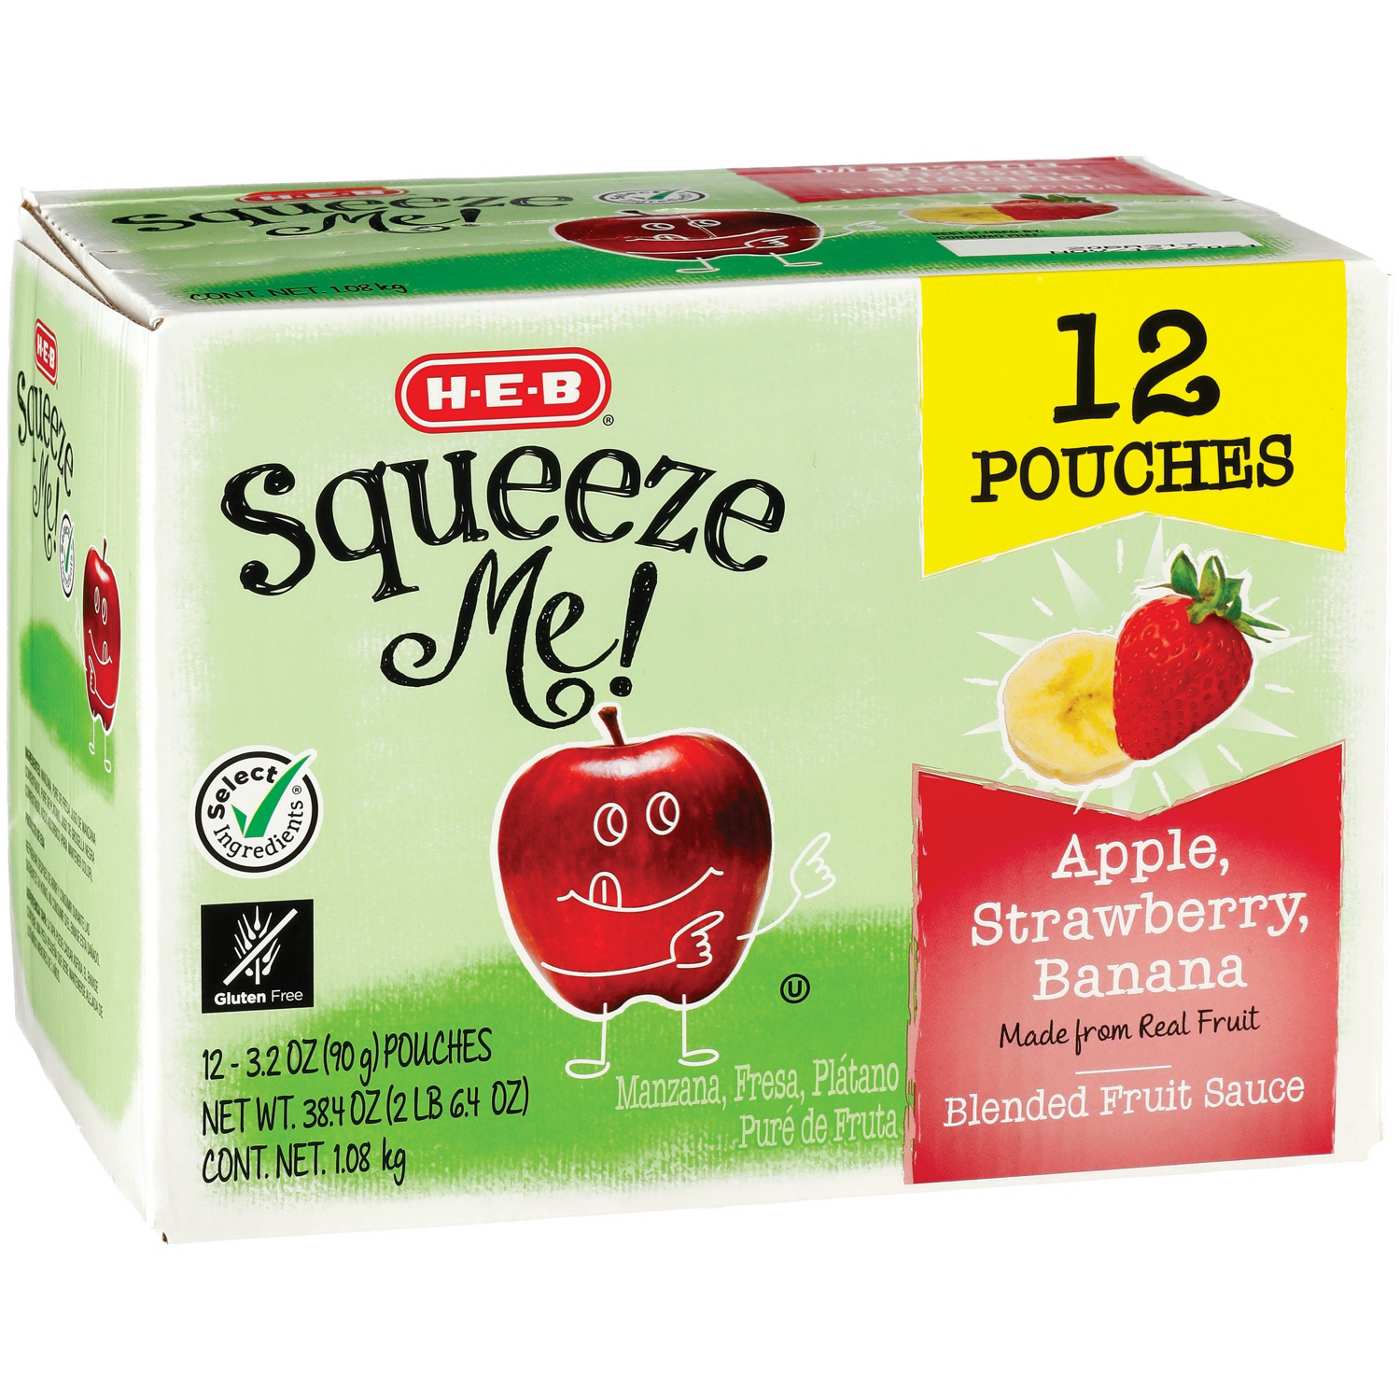 H-E-B Squeeze Me! Apple Strawberry Banana Applesauce Pouches; image 1 of 2